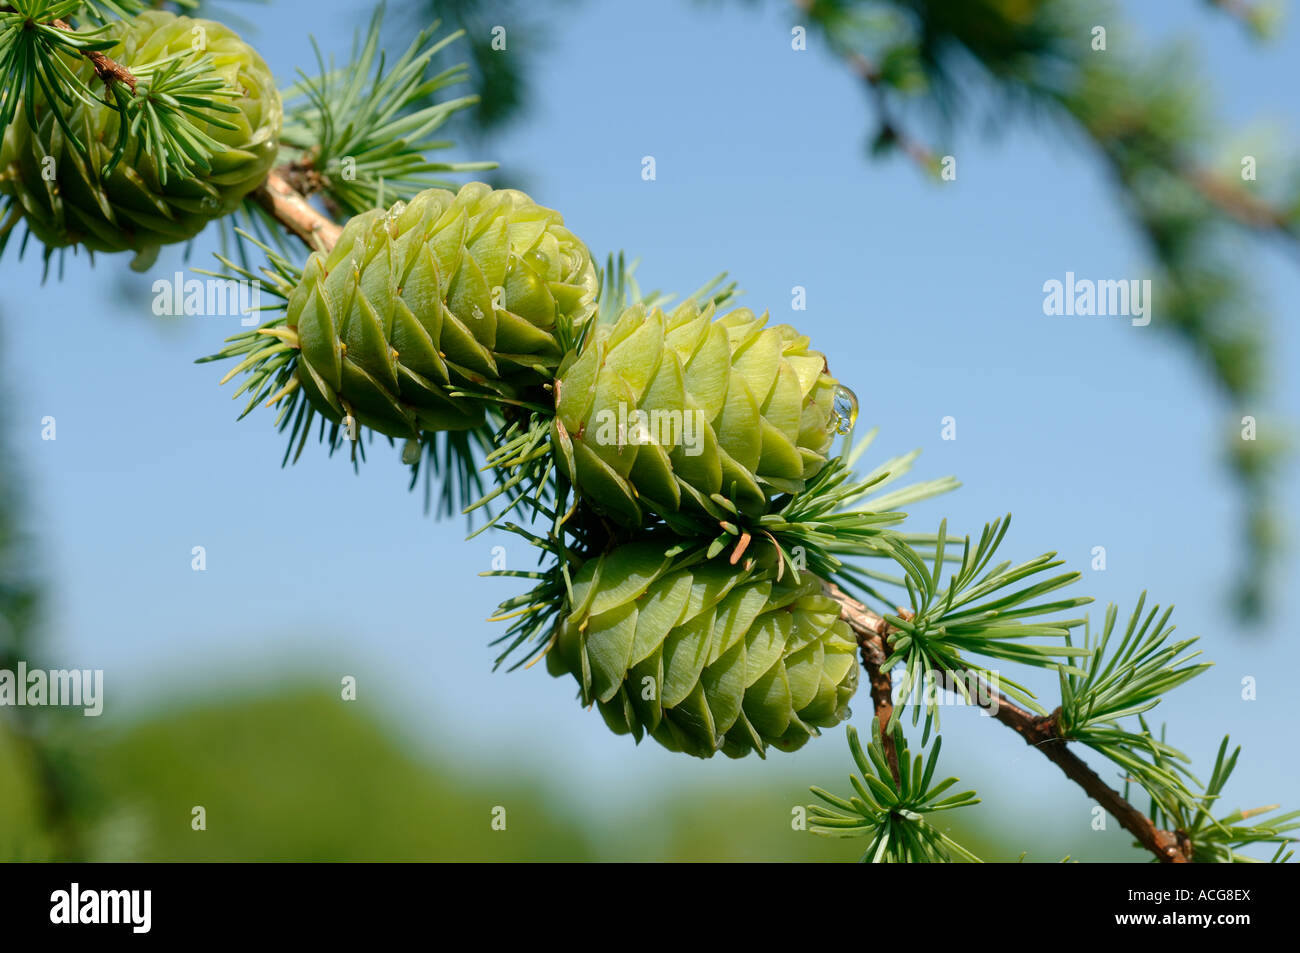 Young larch Larix decidua cones and young needles against a blue sky Stock Photo